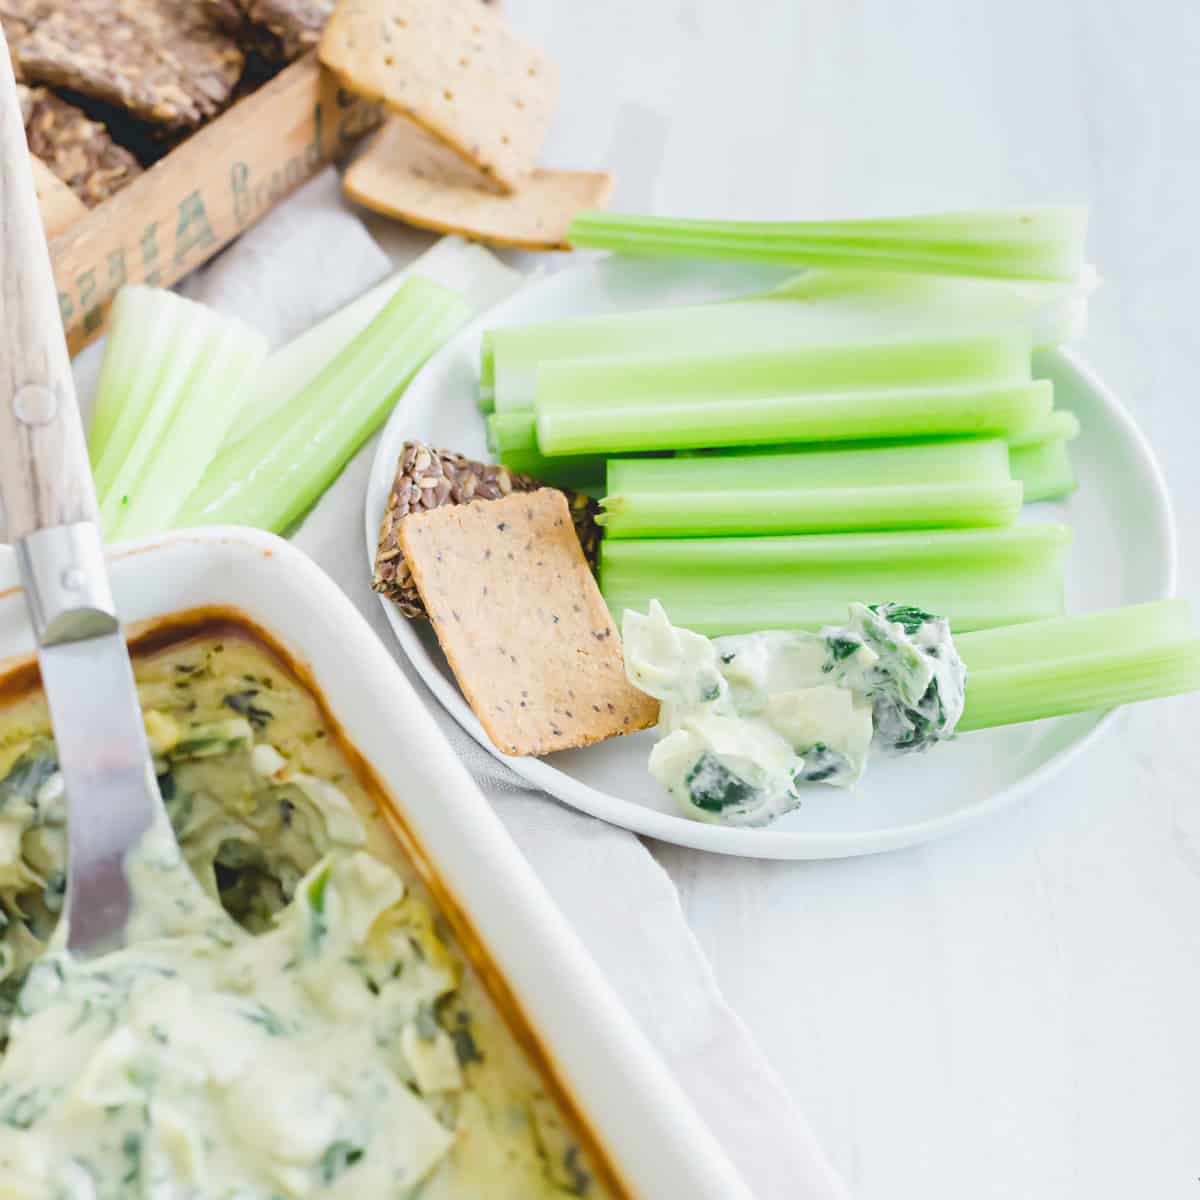 Plate of celery sticks and crackers with vegan spinach and artichoke dip.